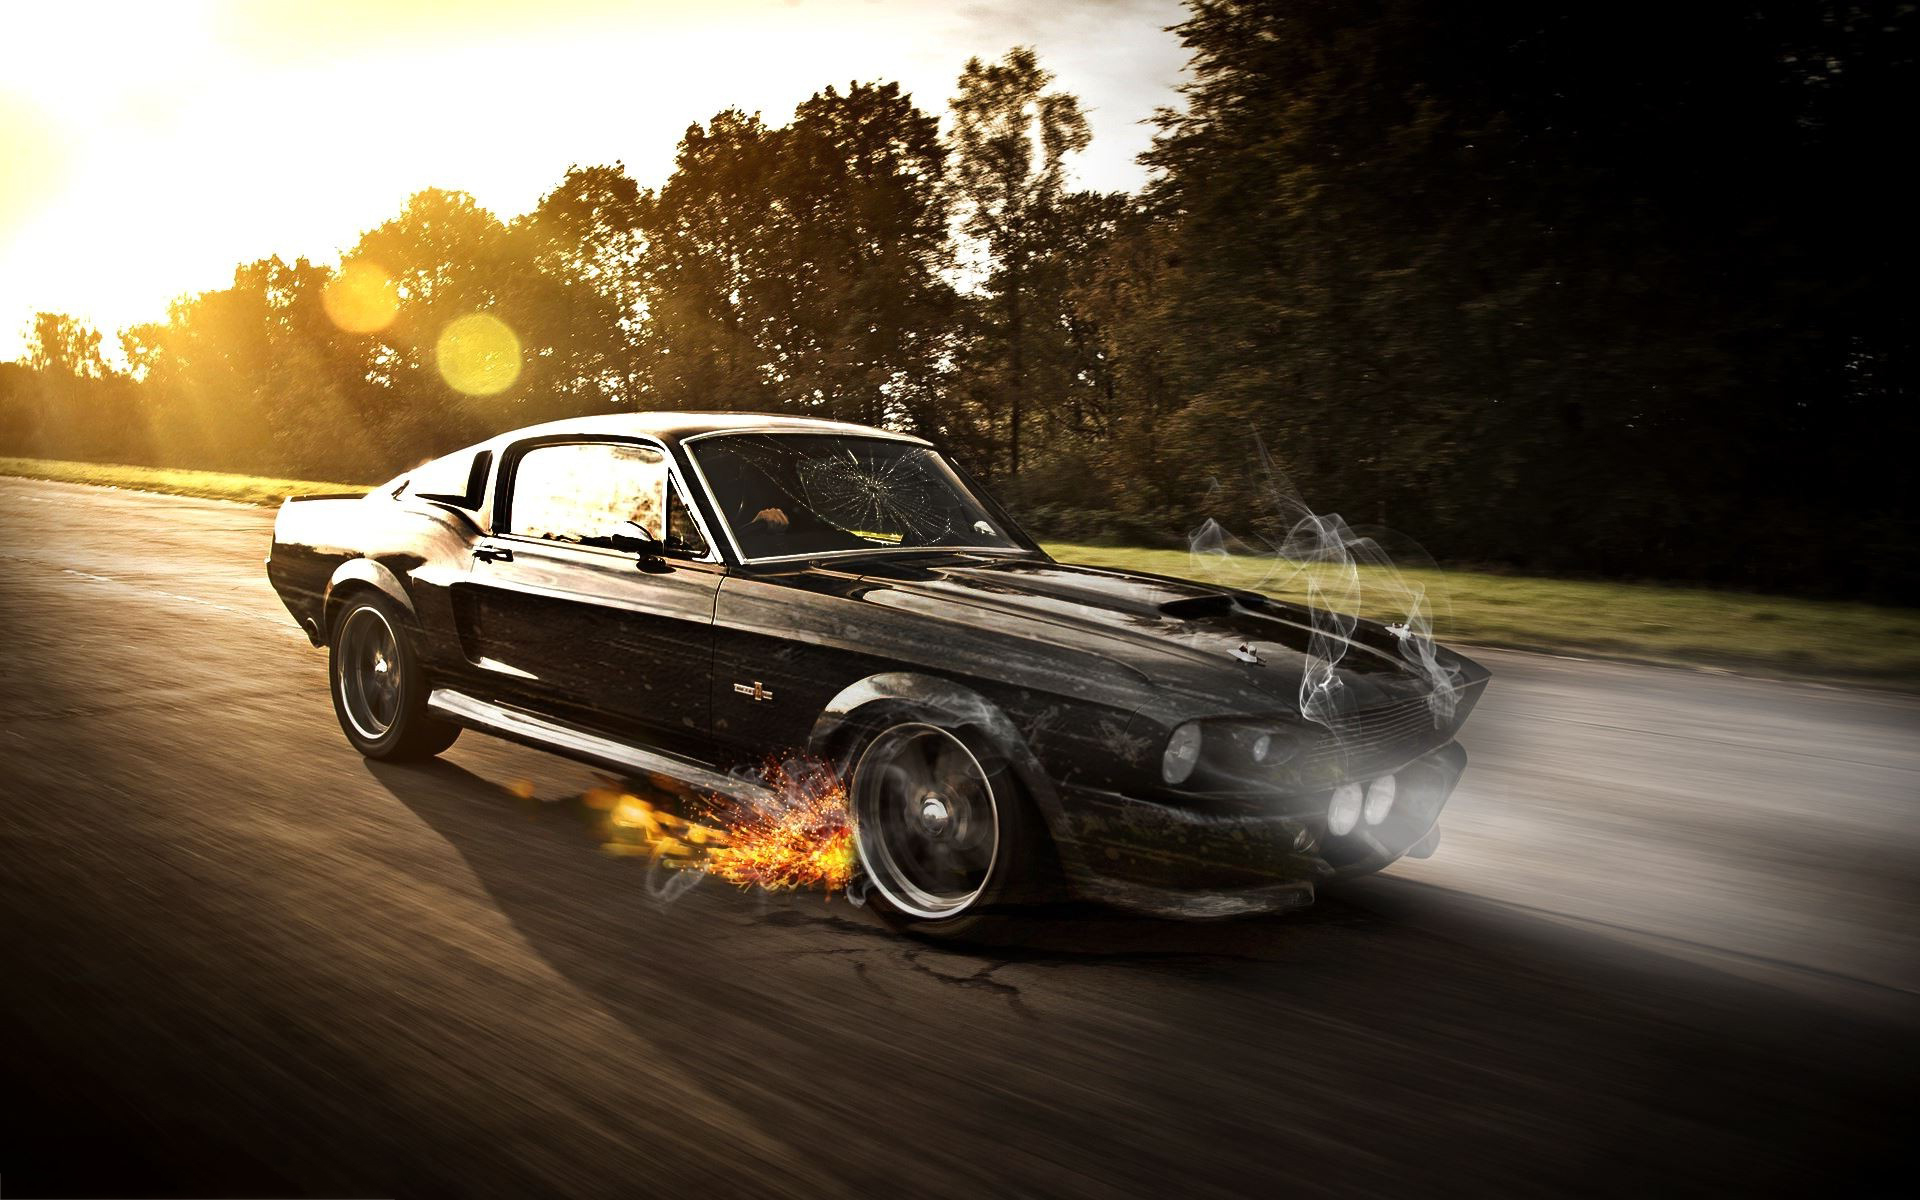 Mustang shelby photoshopped